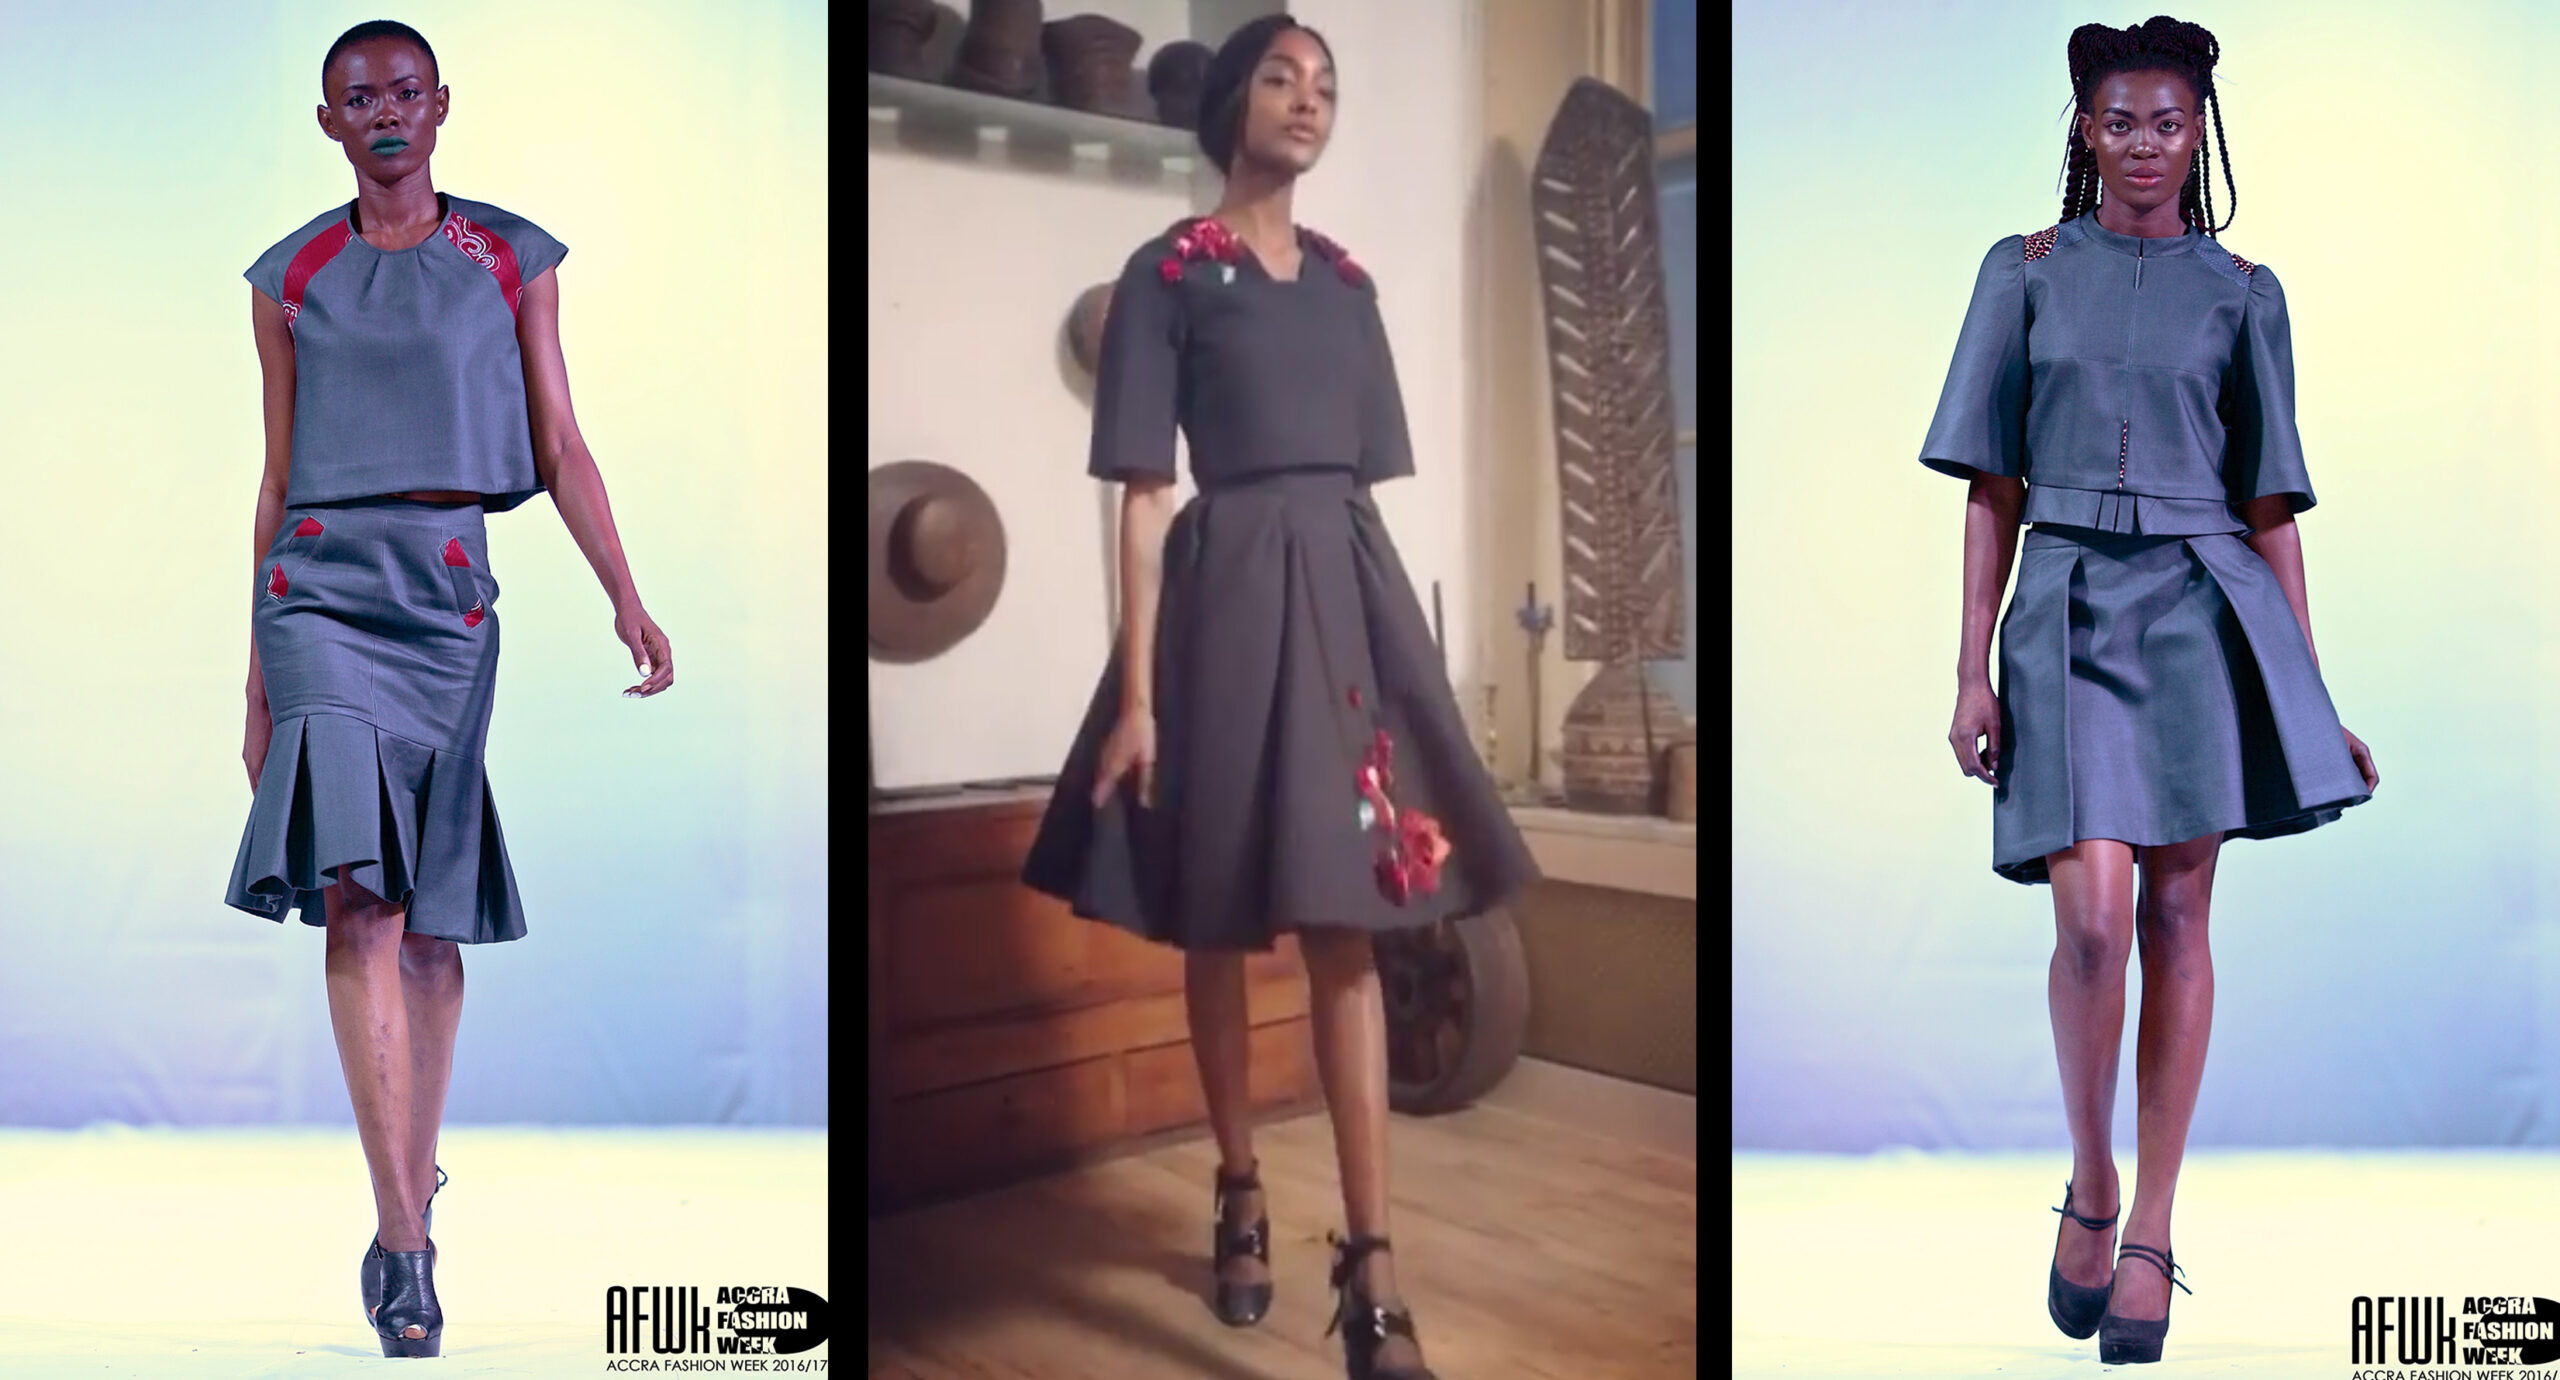 Zac Posen Vs Ghanaian Fashion Brand Afre Anko In Copy Cat Style Dress. Influence Or Coincidence